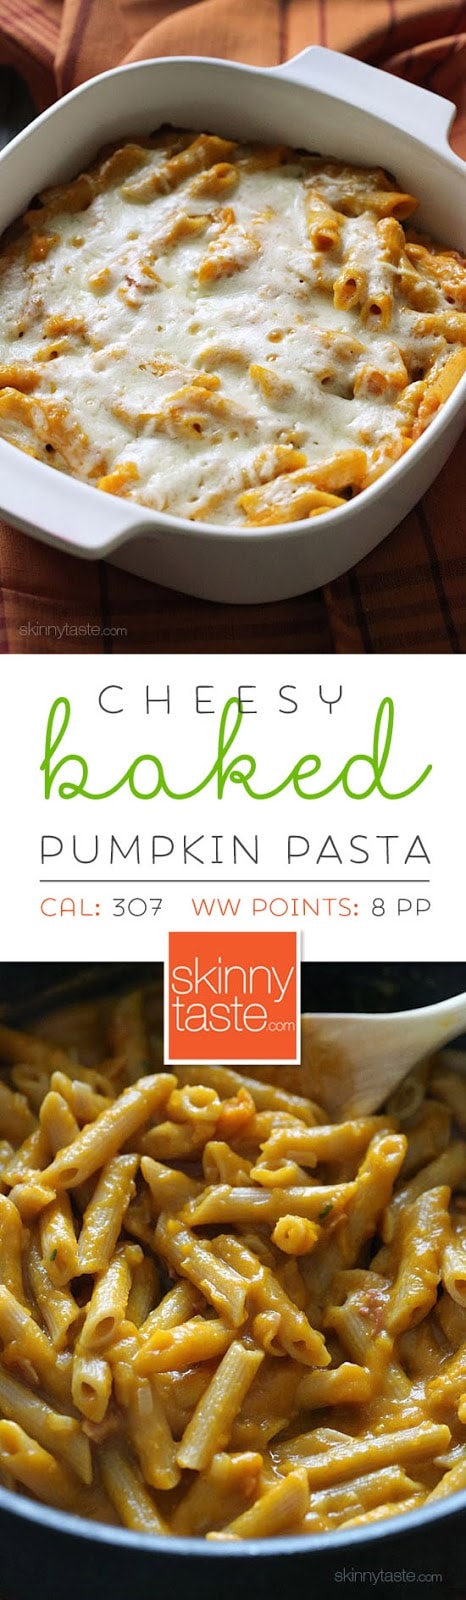 Cheesy Baked Pumpkin Pasta – the dish that got my family to like whole wheat pasta! Made with pumpkin, bacon, shallots, pecorino cheese and a touch of rosemary then topped with mozzarella cheese. 